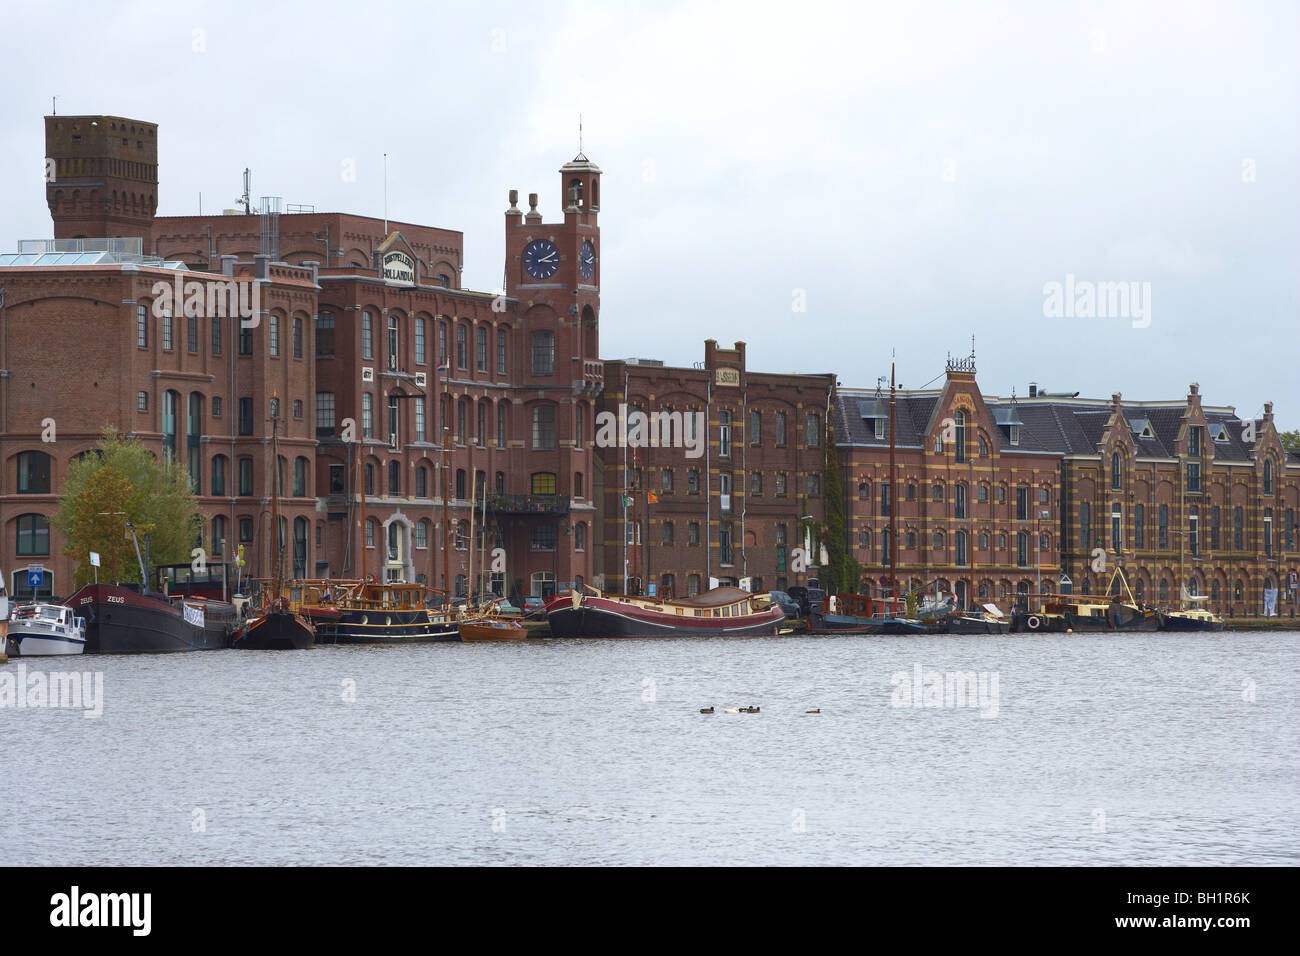 Brick-lined buildings along the river Zaan at Wormerveer, Netherlands, Europe Stock Photo